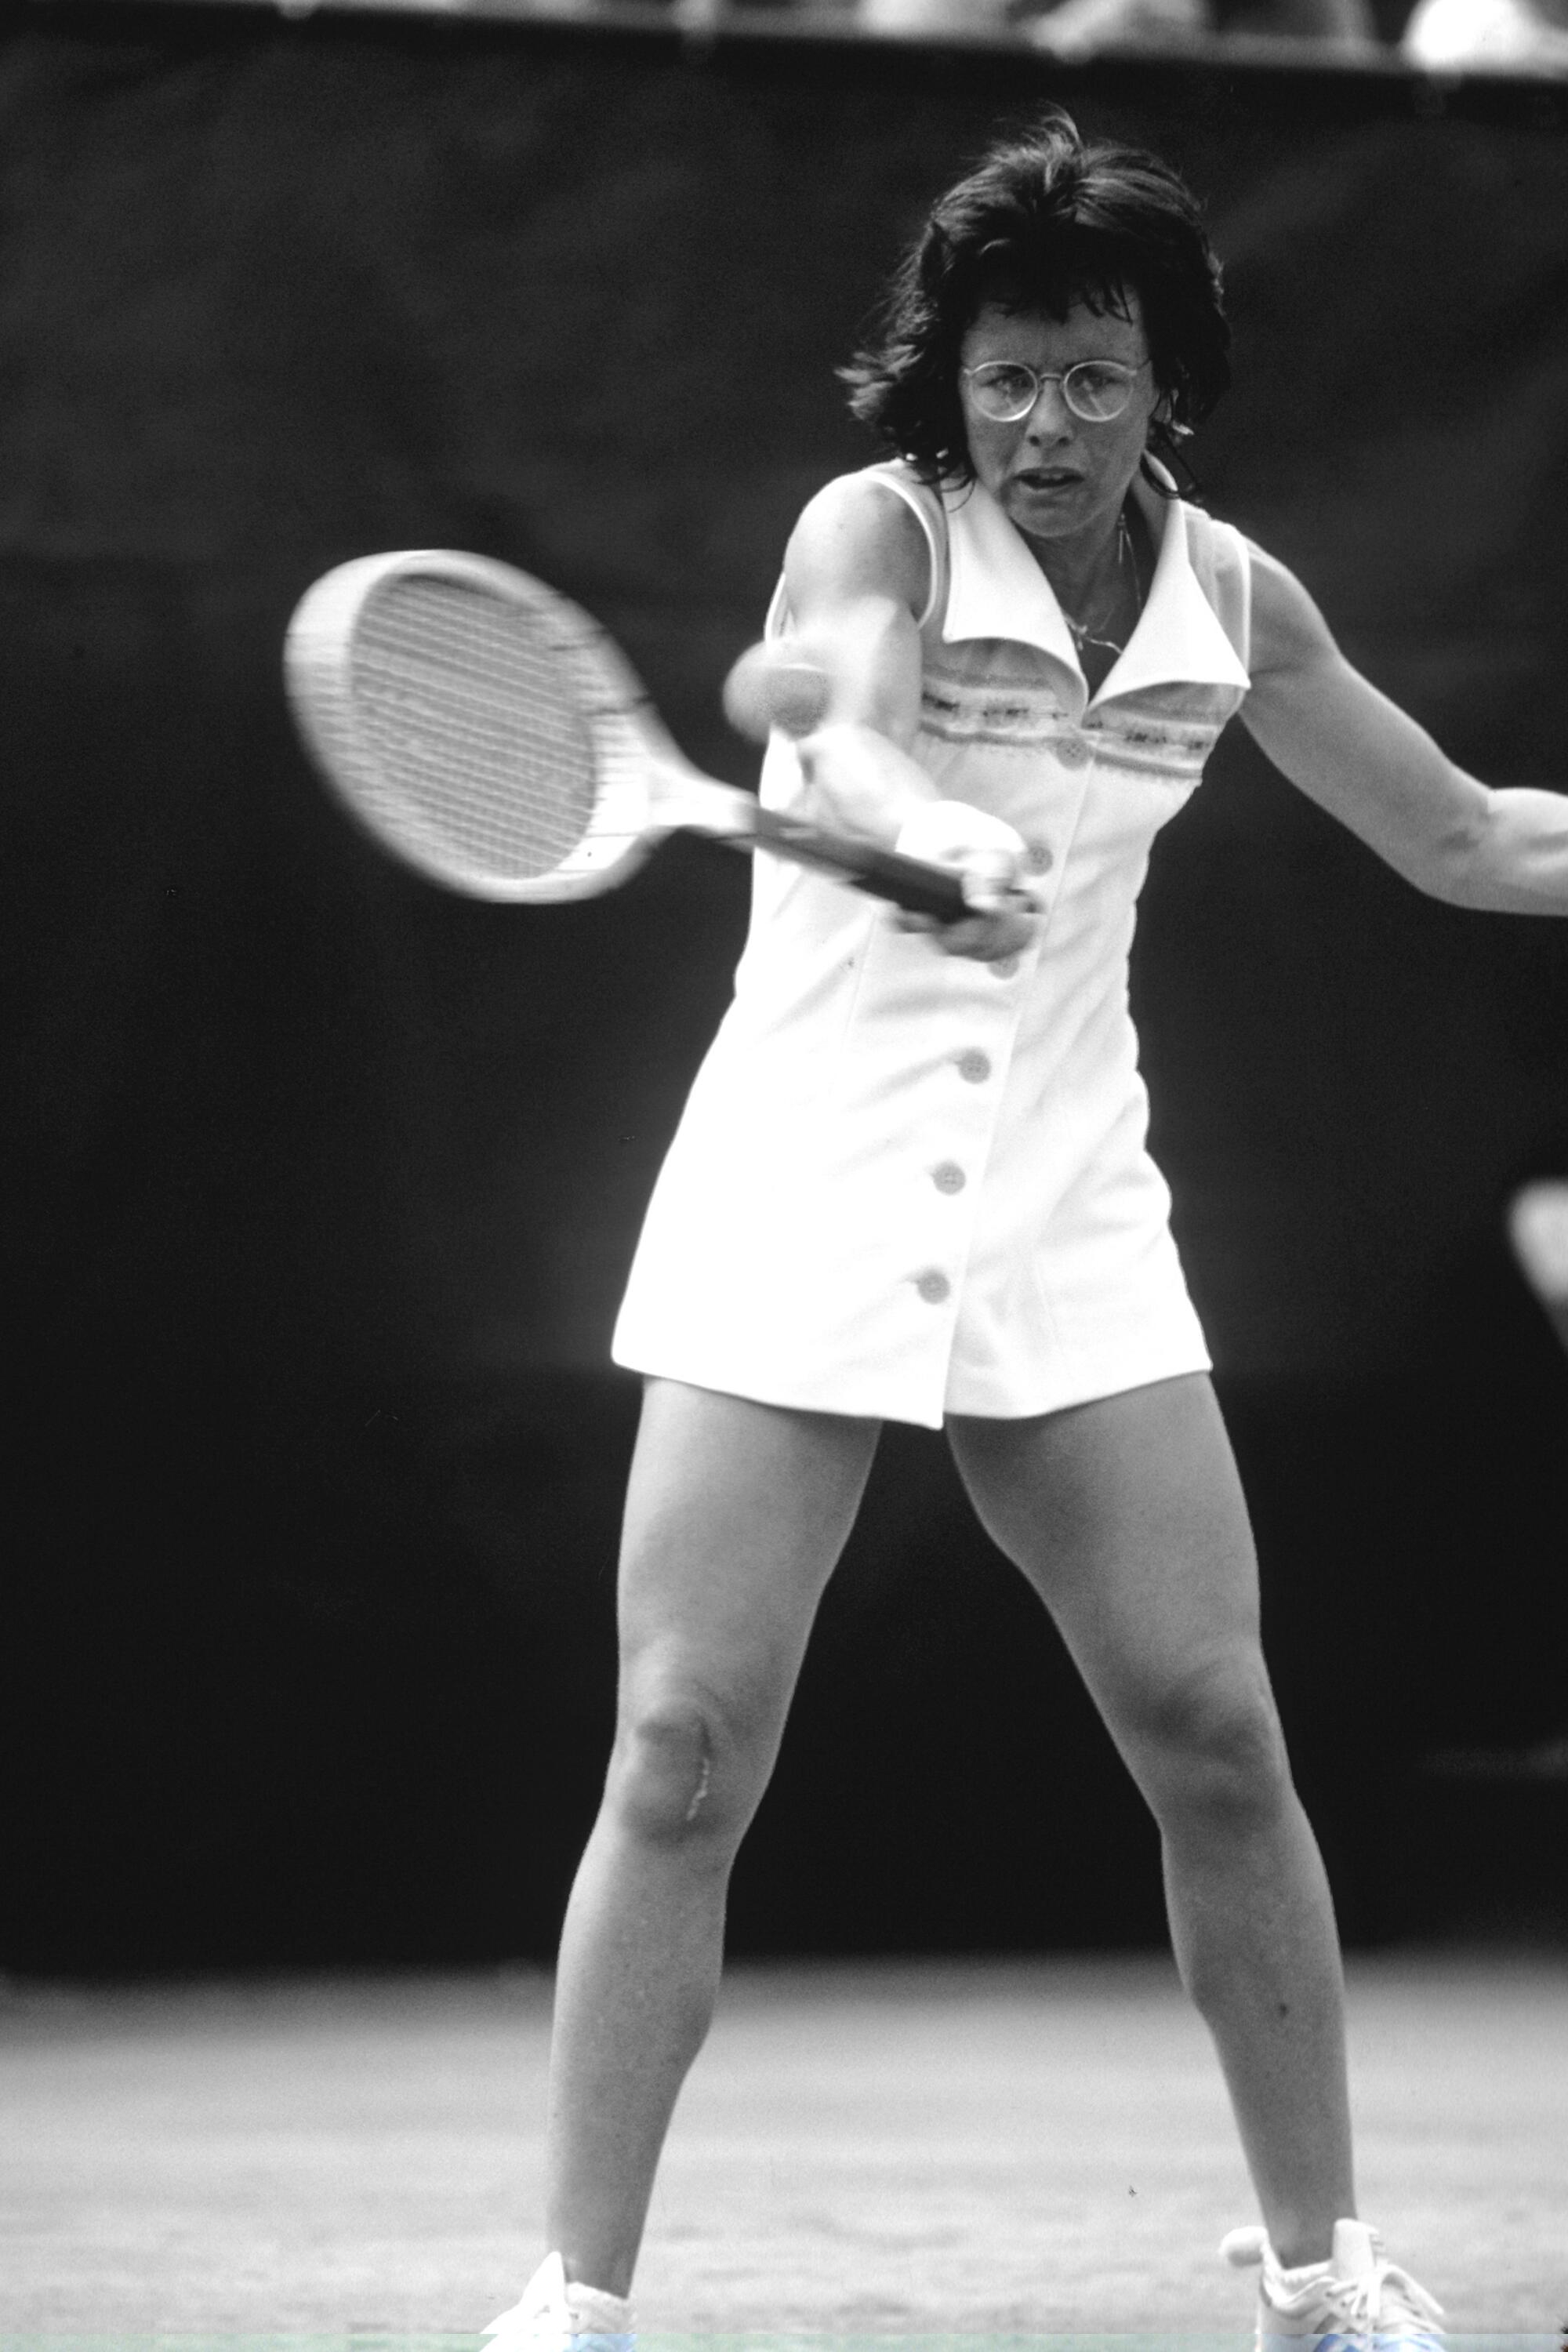 An undated photograph of Billie Jean King playing tennis.